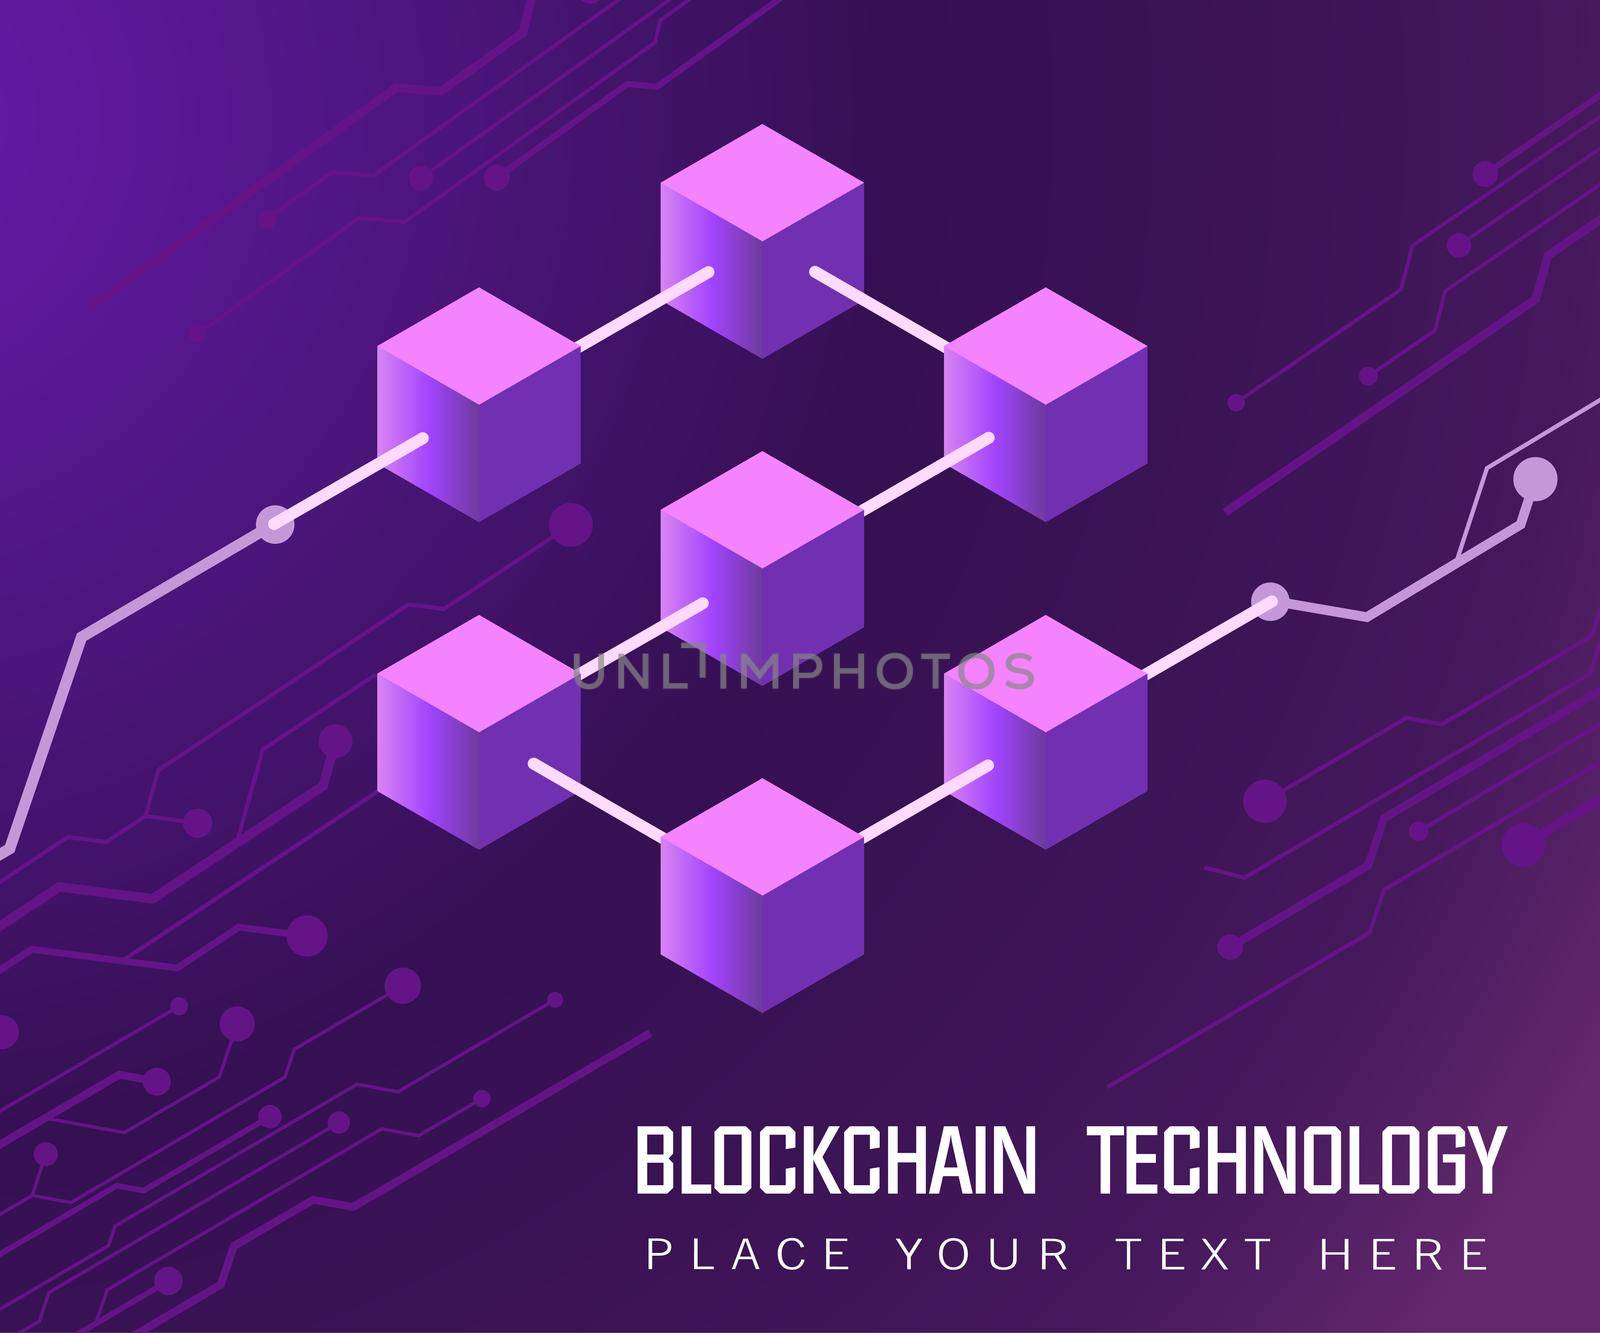 blockchain technology Connecting cube Cryptocurrency Blockchain isometric vector illustration.